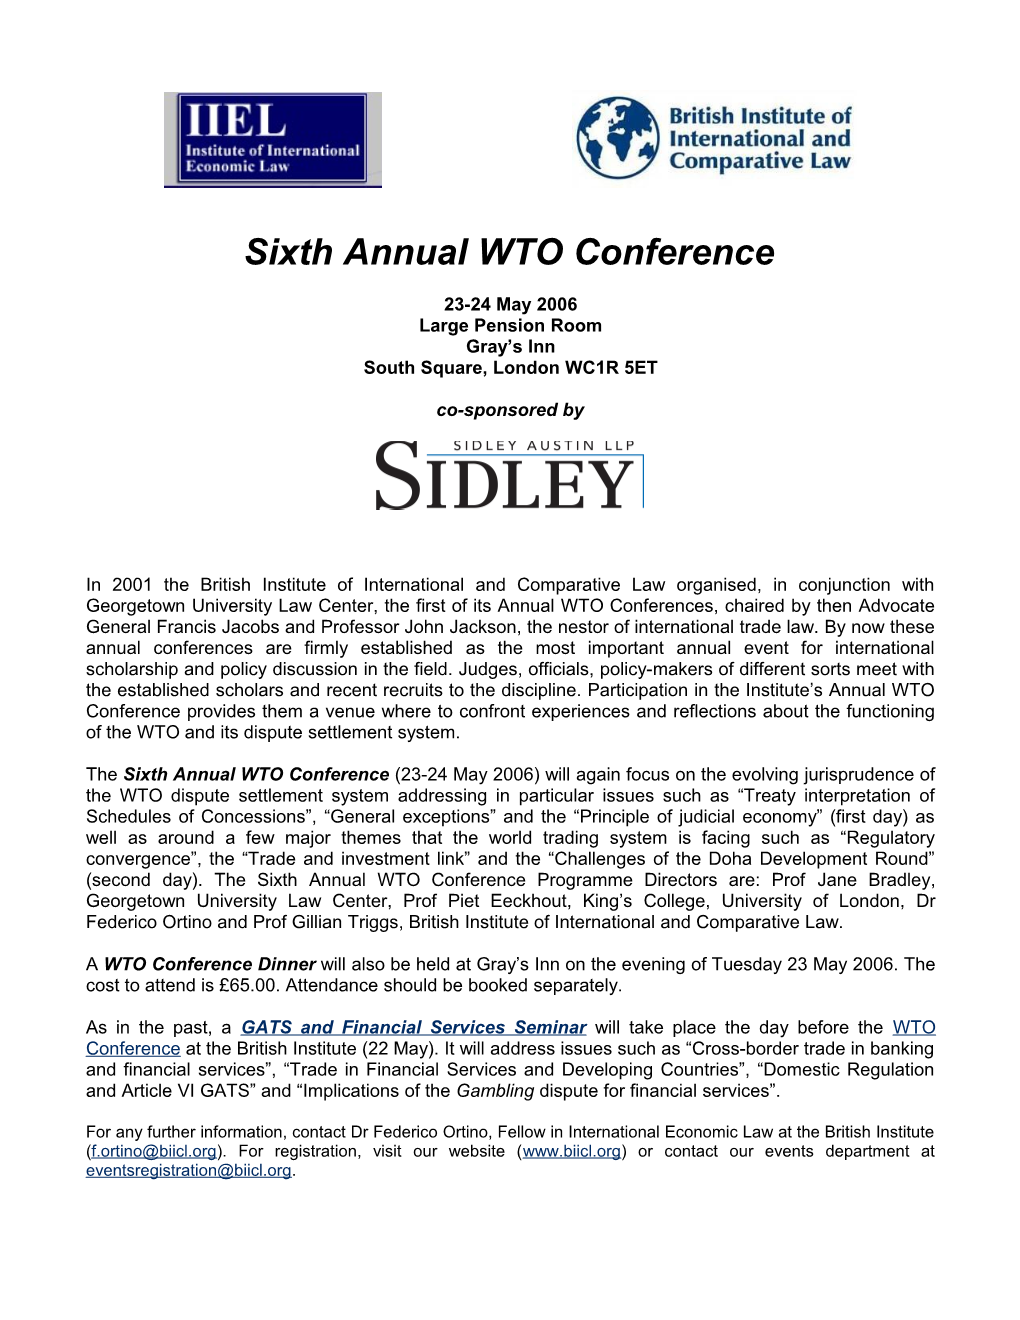 The Tenth Anniversary of WTO Dispute Settlement